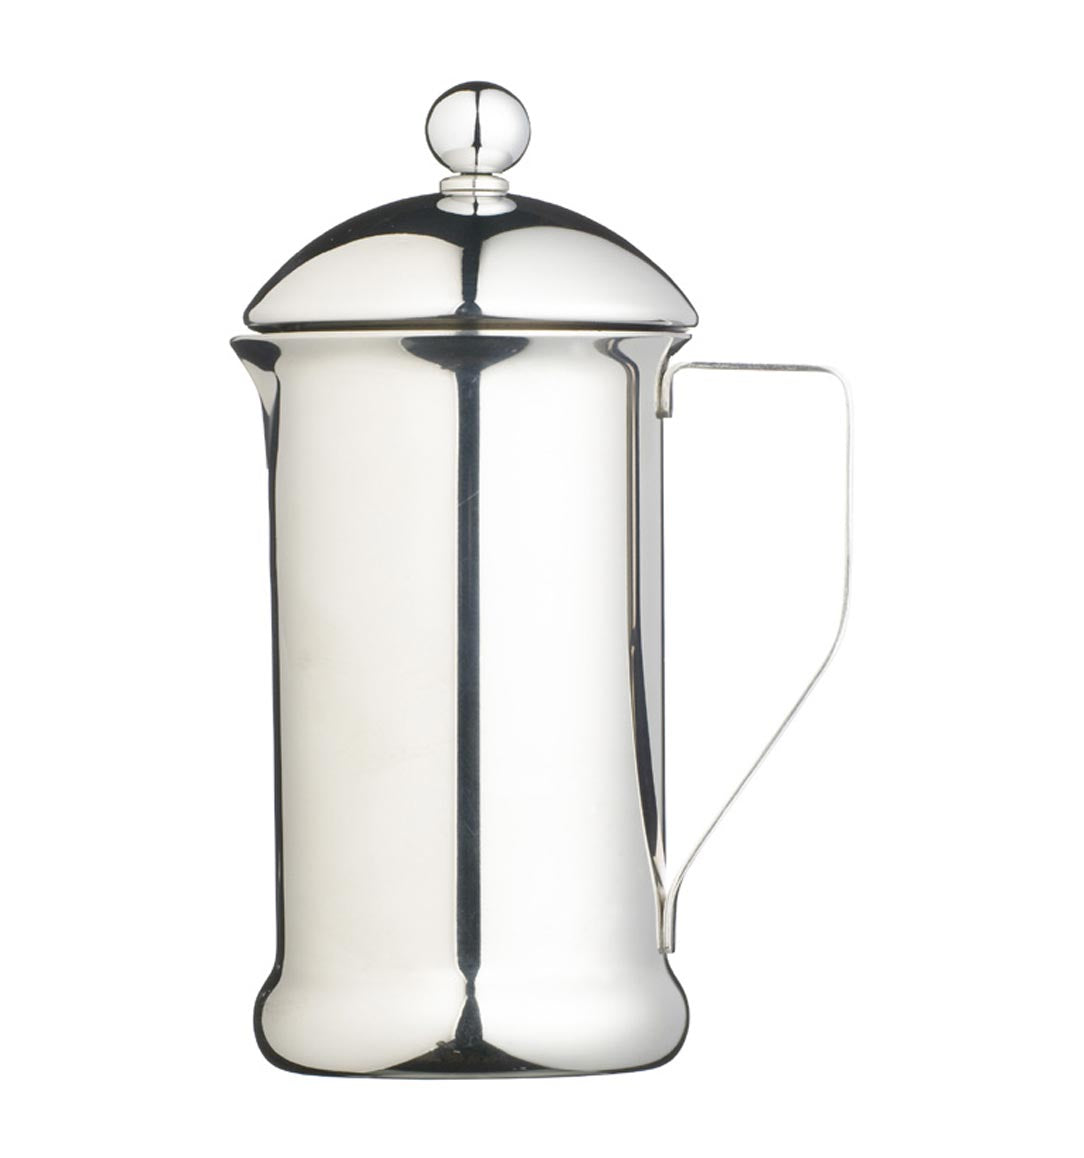 Le’Xpress lassix Eight Cup Stainless Steel Cafetiere - 3 cup